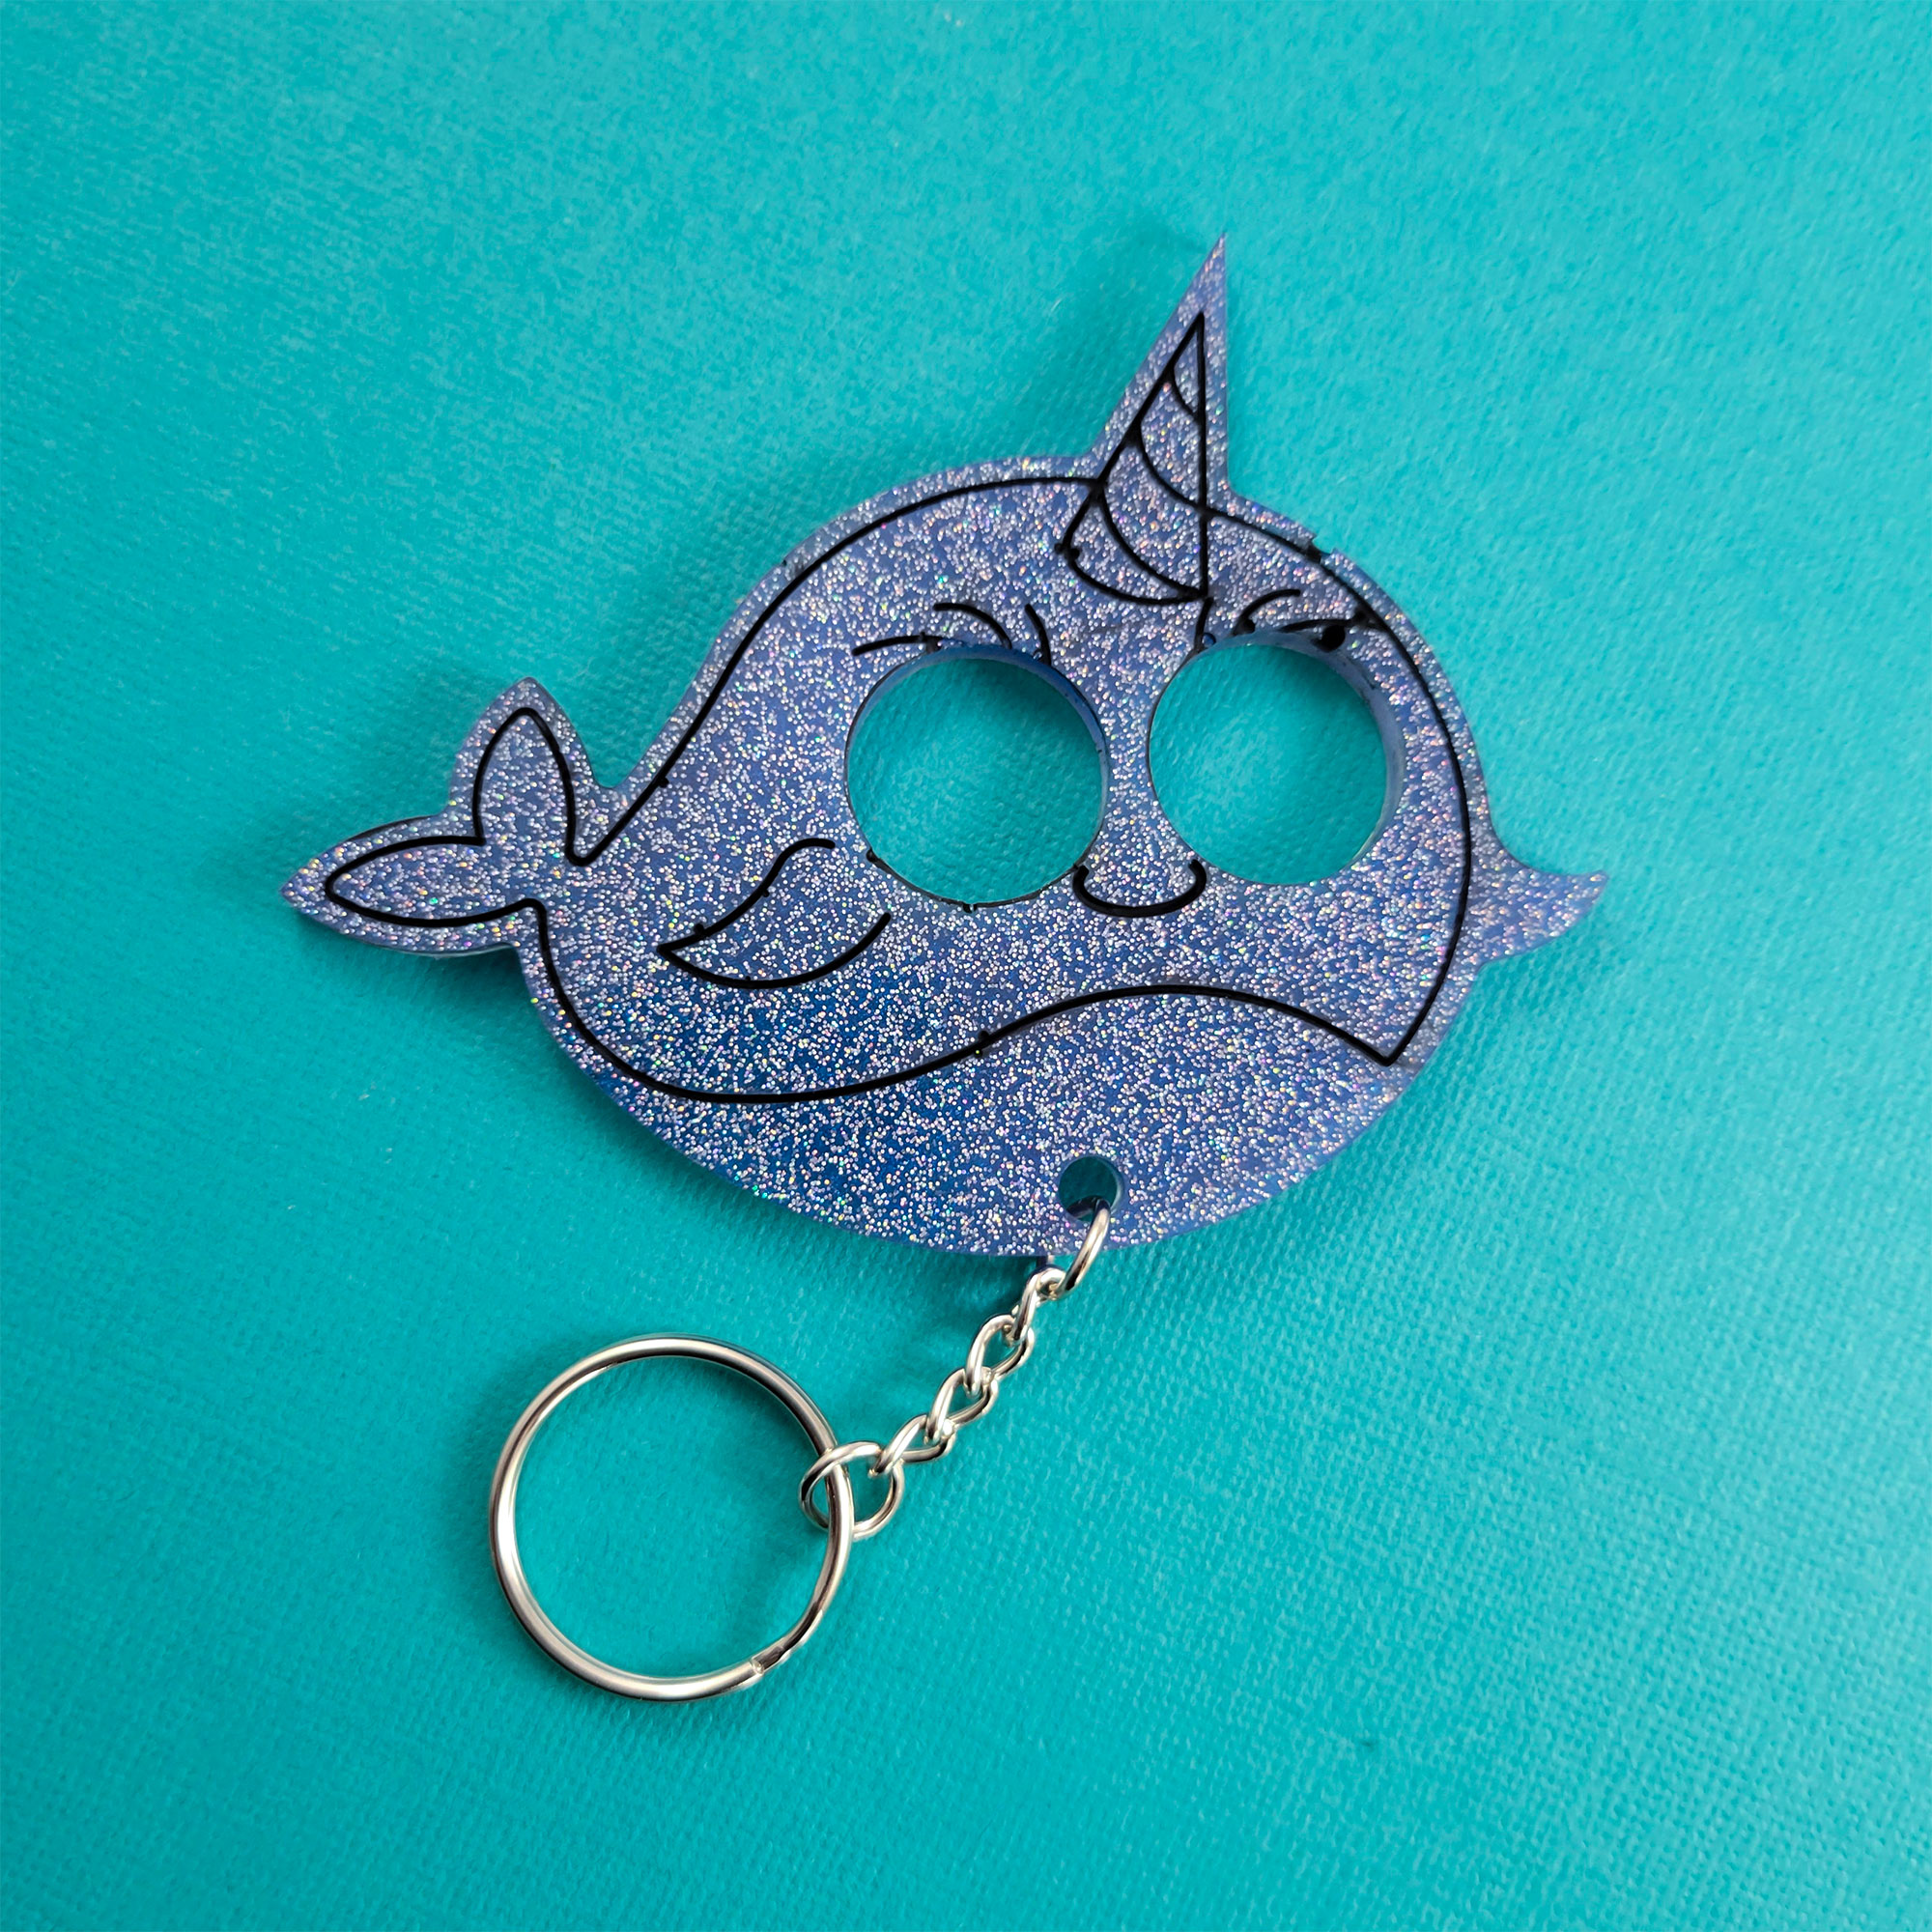 Glittery Blue Narwhal Safety Keychain by Wilde Designs